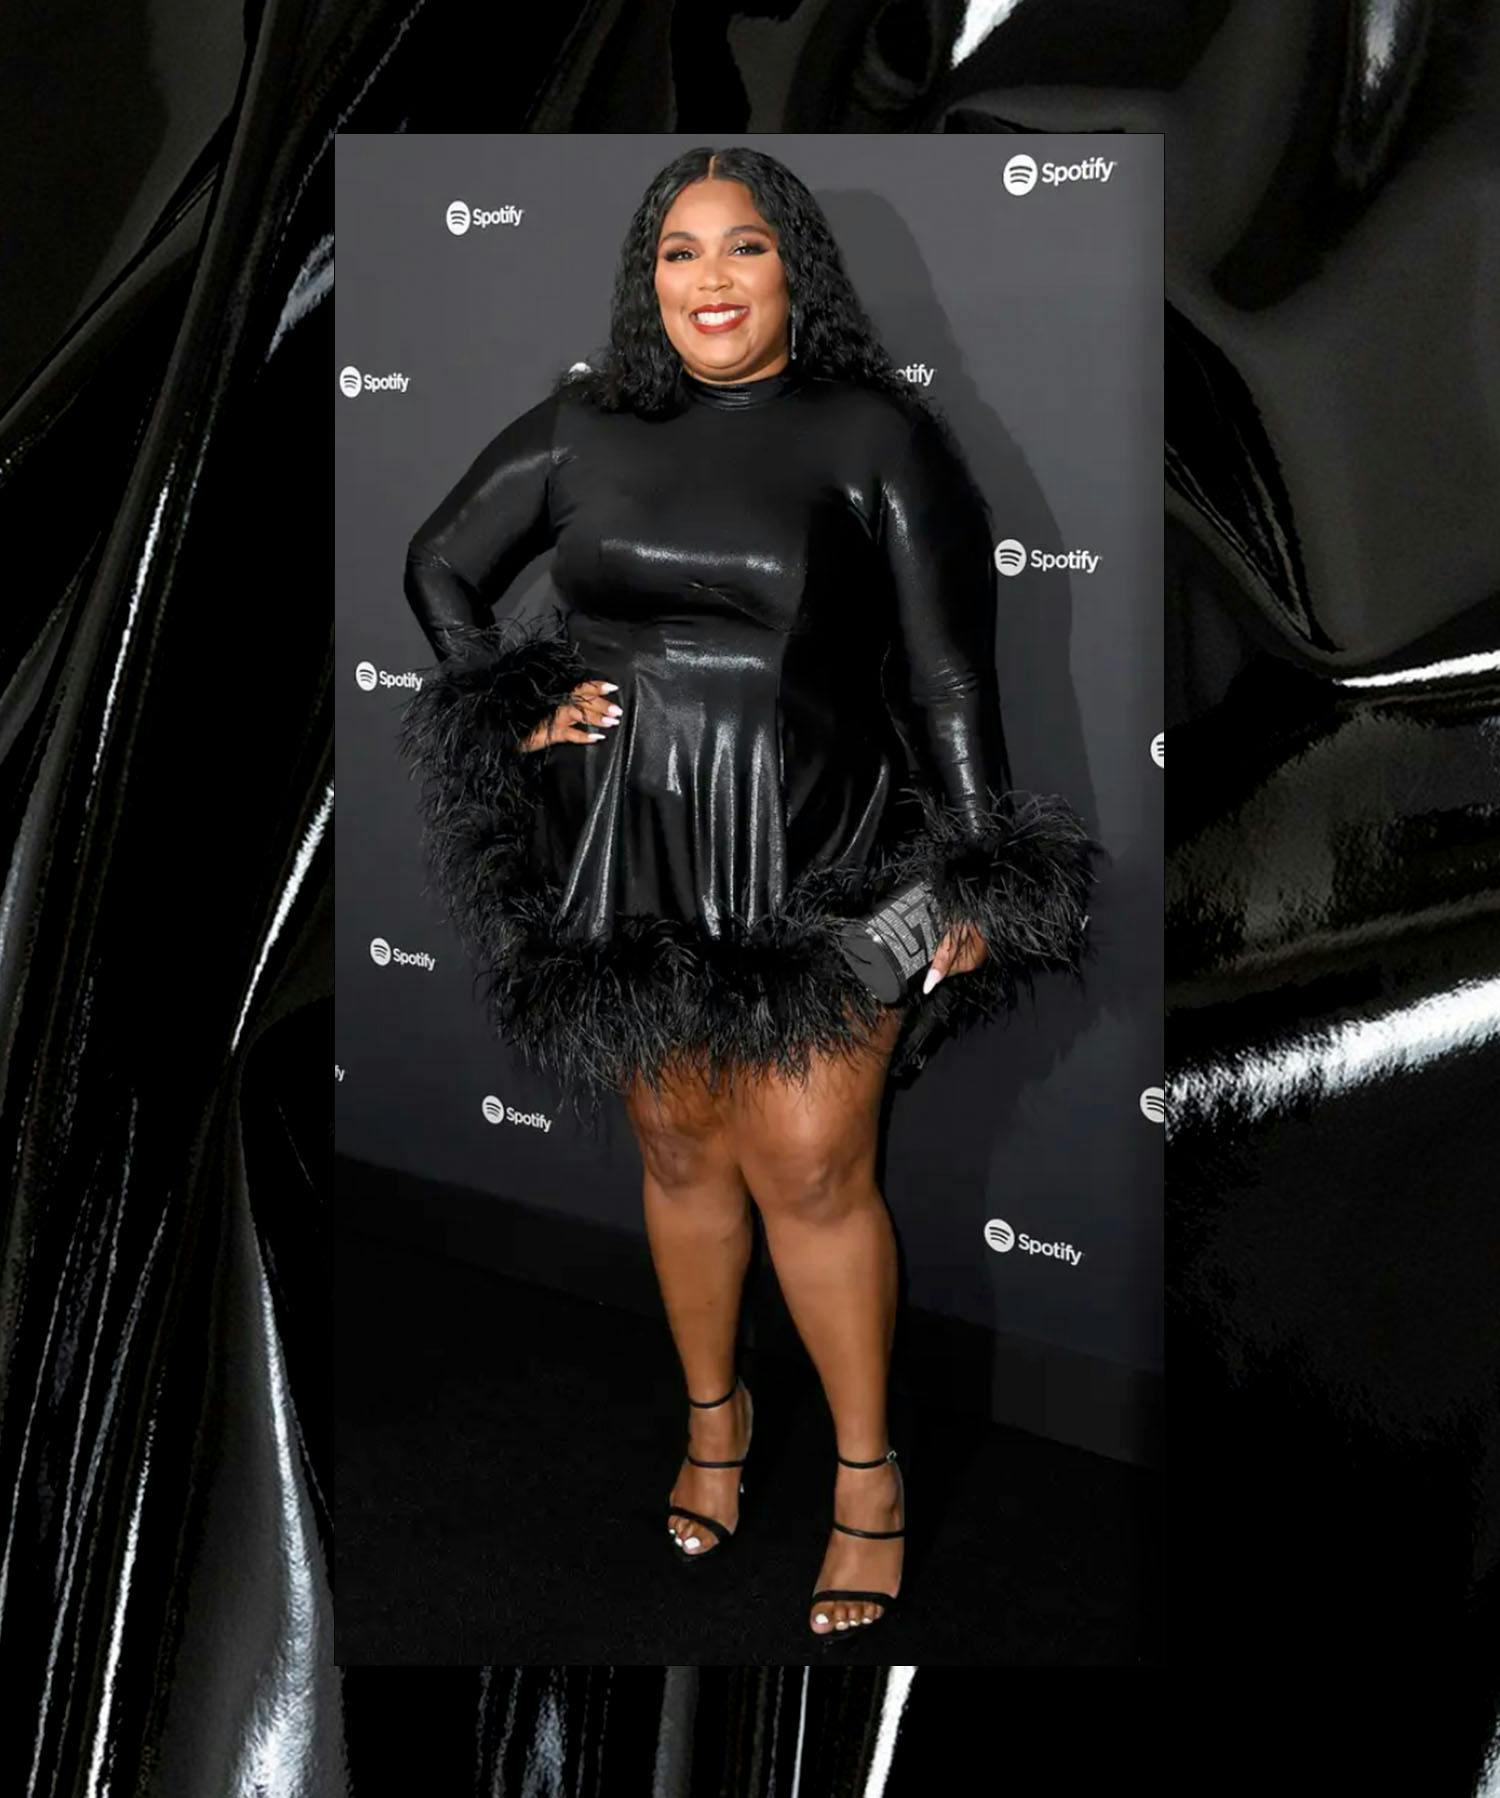 Lizzo in an awesome leather tutu